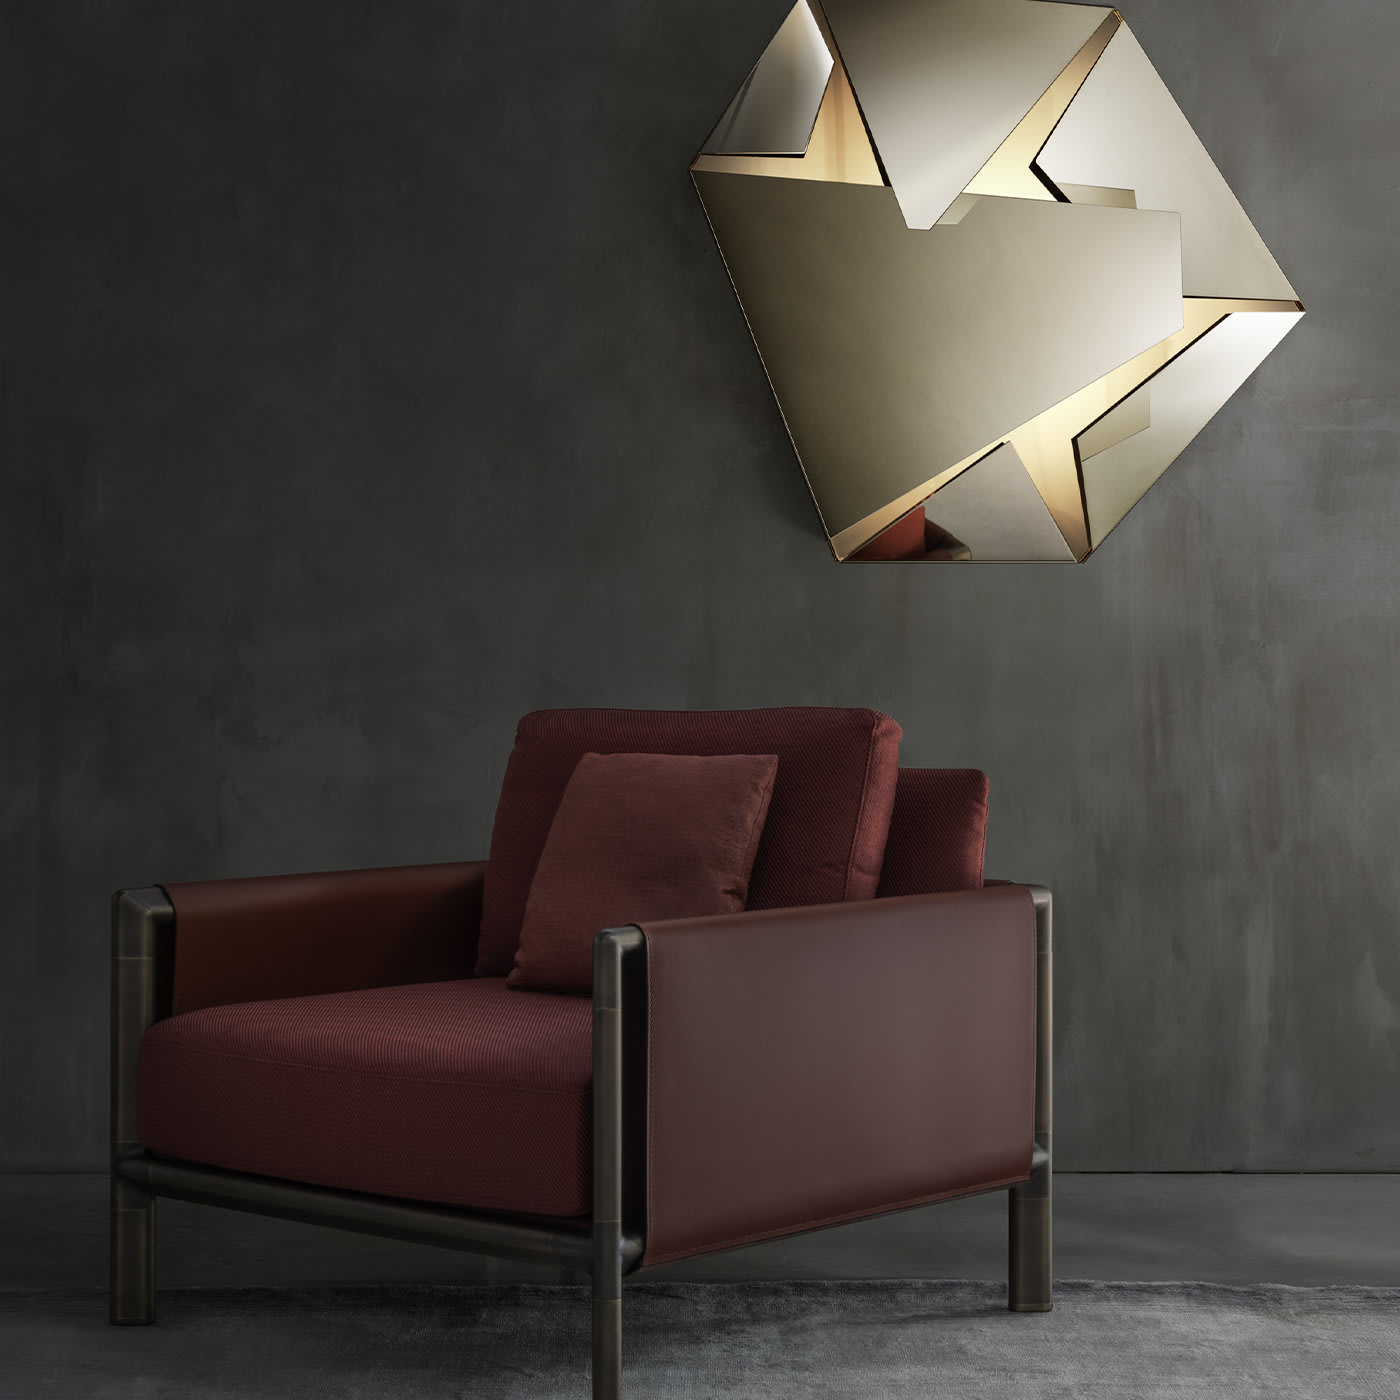 Kaleidos Gold Small Wall Light By Campana Brothers - Ghidini 1961